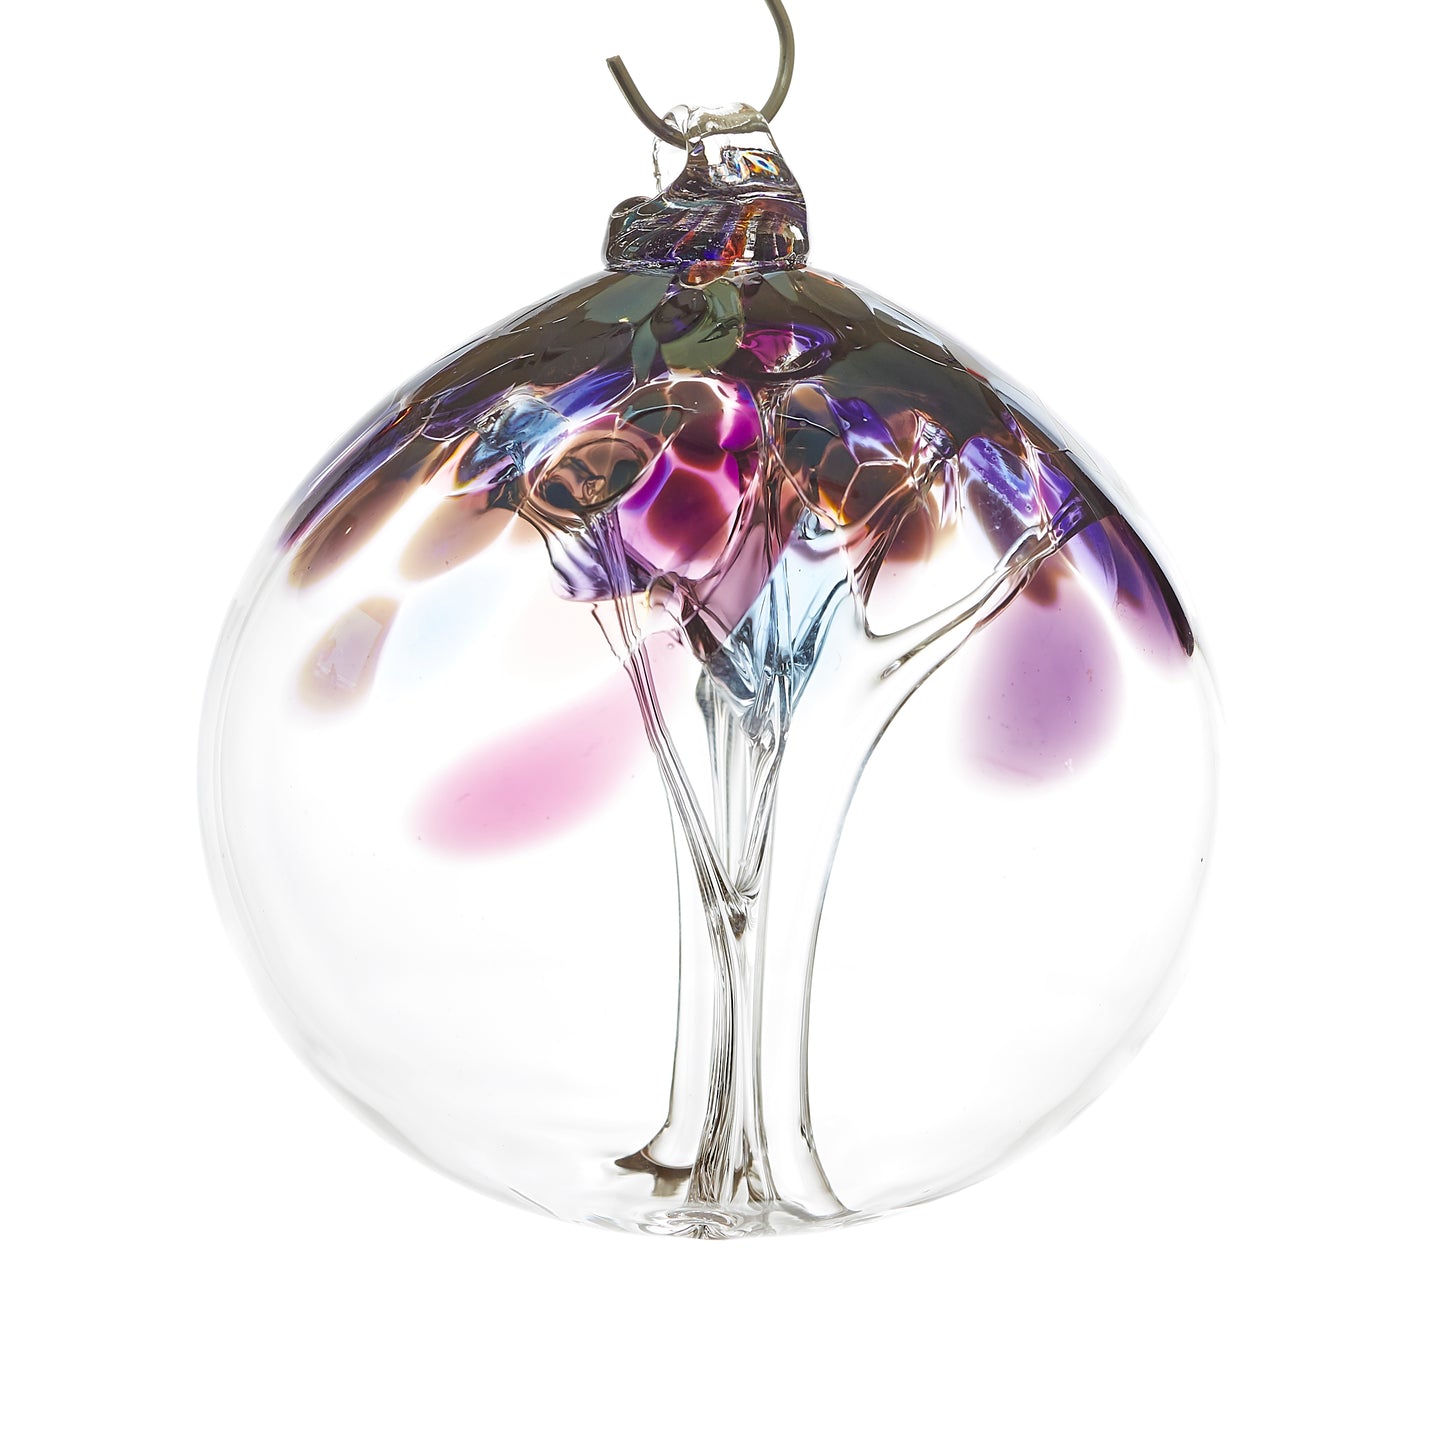 Hand blown glass tree of life ball. Purple and cranberry glass. Colour combination is called "Amethyst."